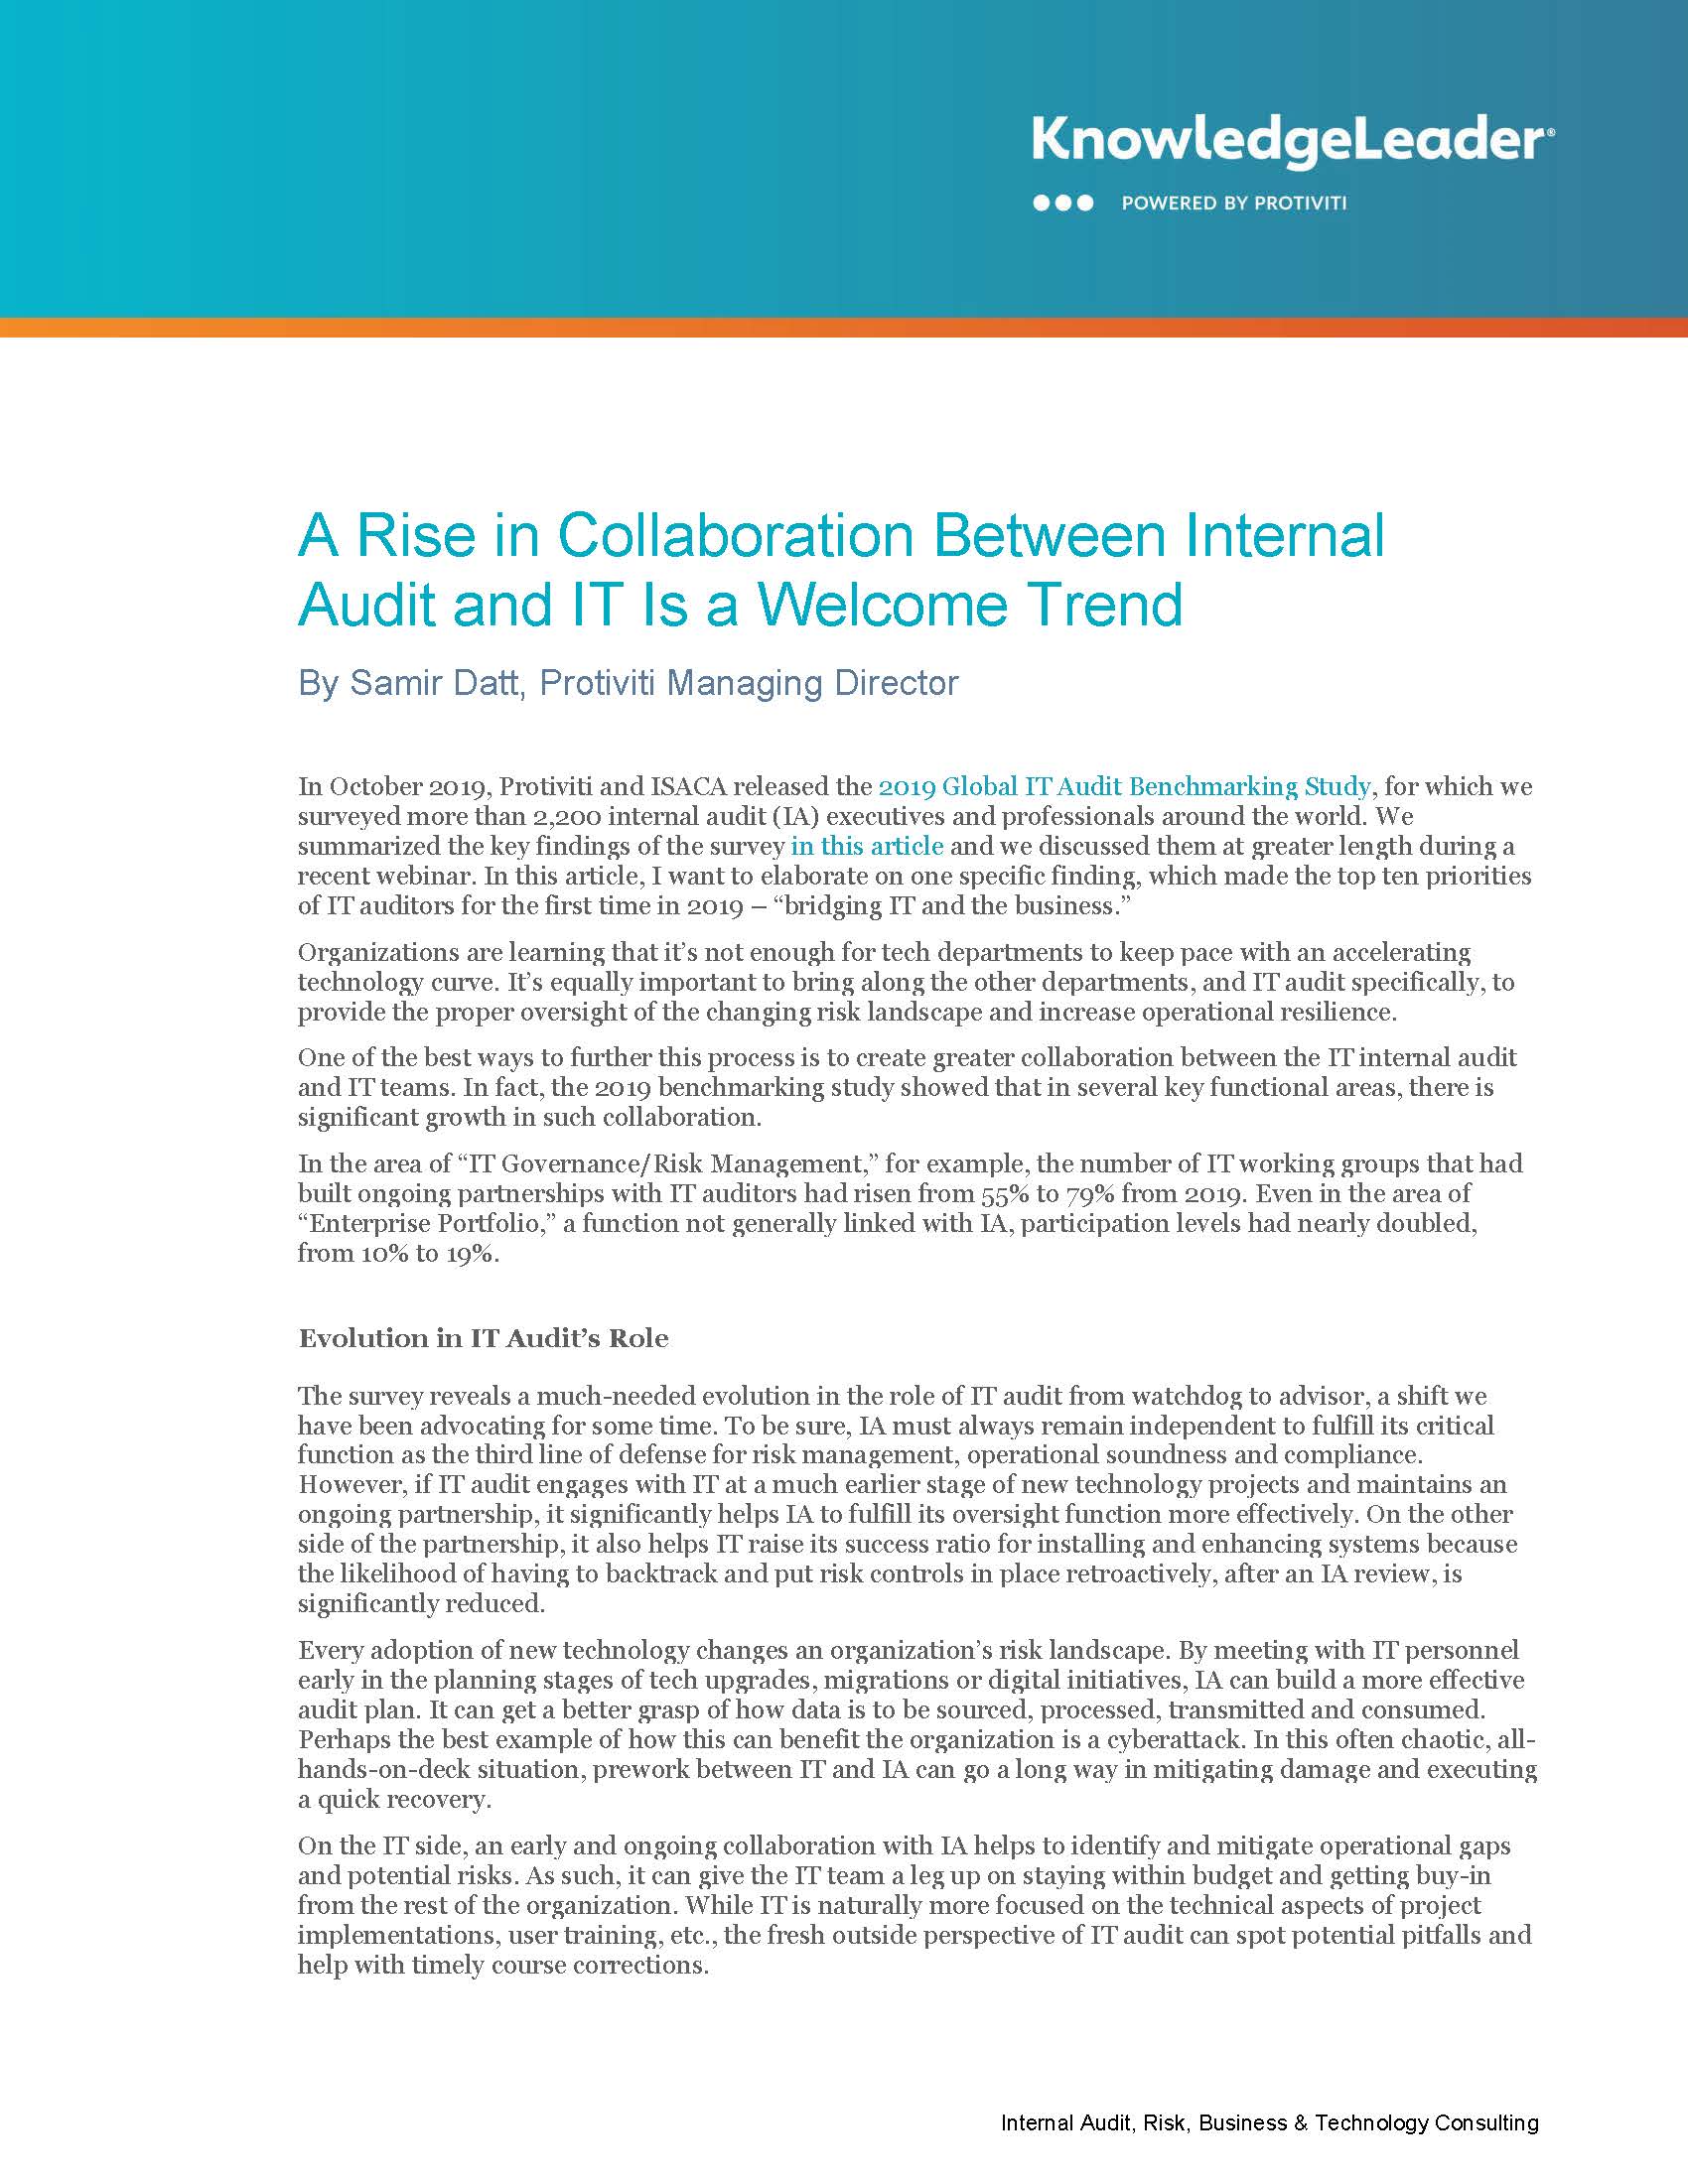 Screenshot of the first page of A Rise in Collaboration Between Internal Audit and IT Is a Welcome Trend